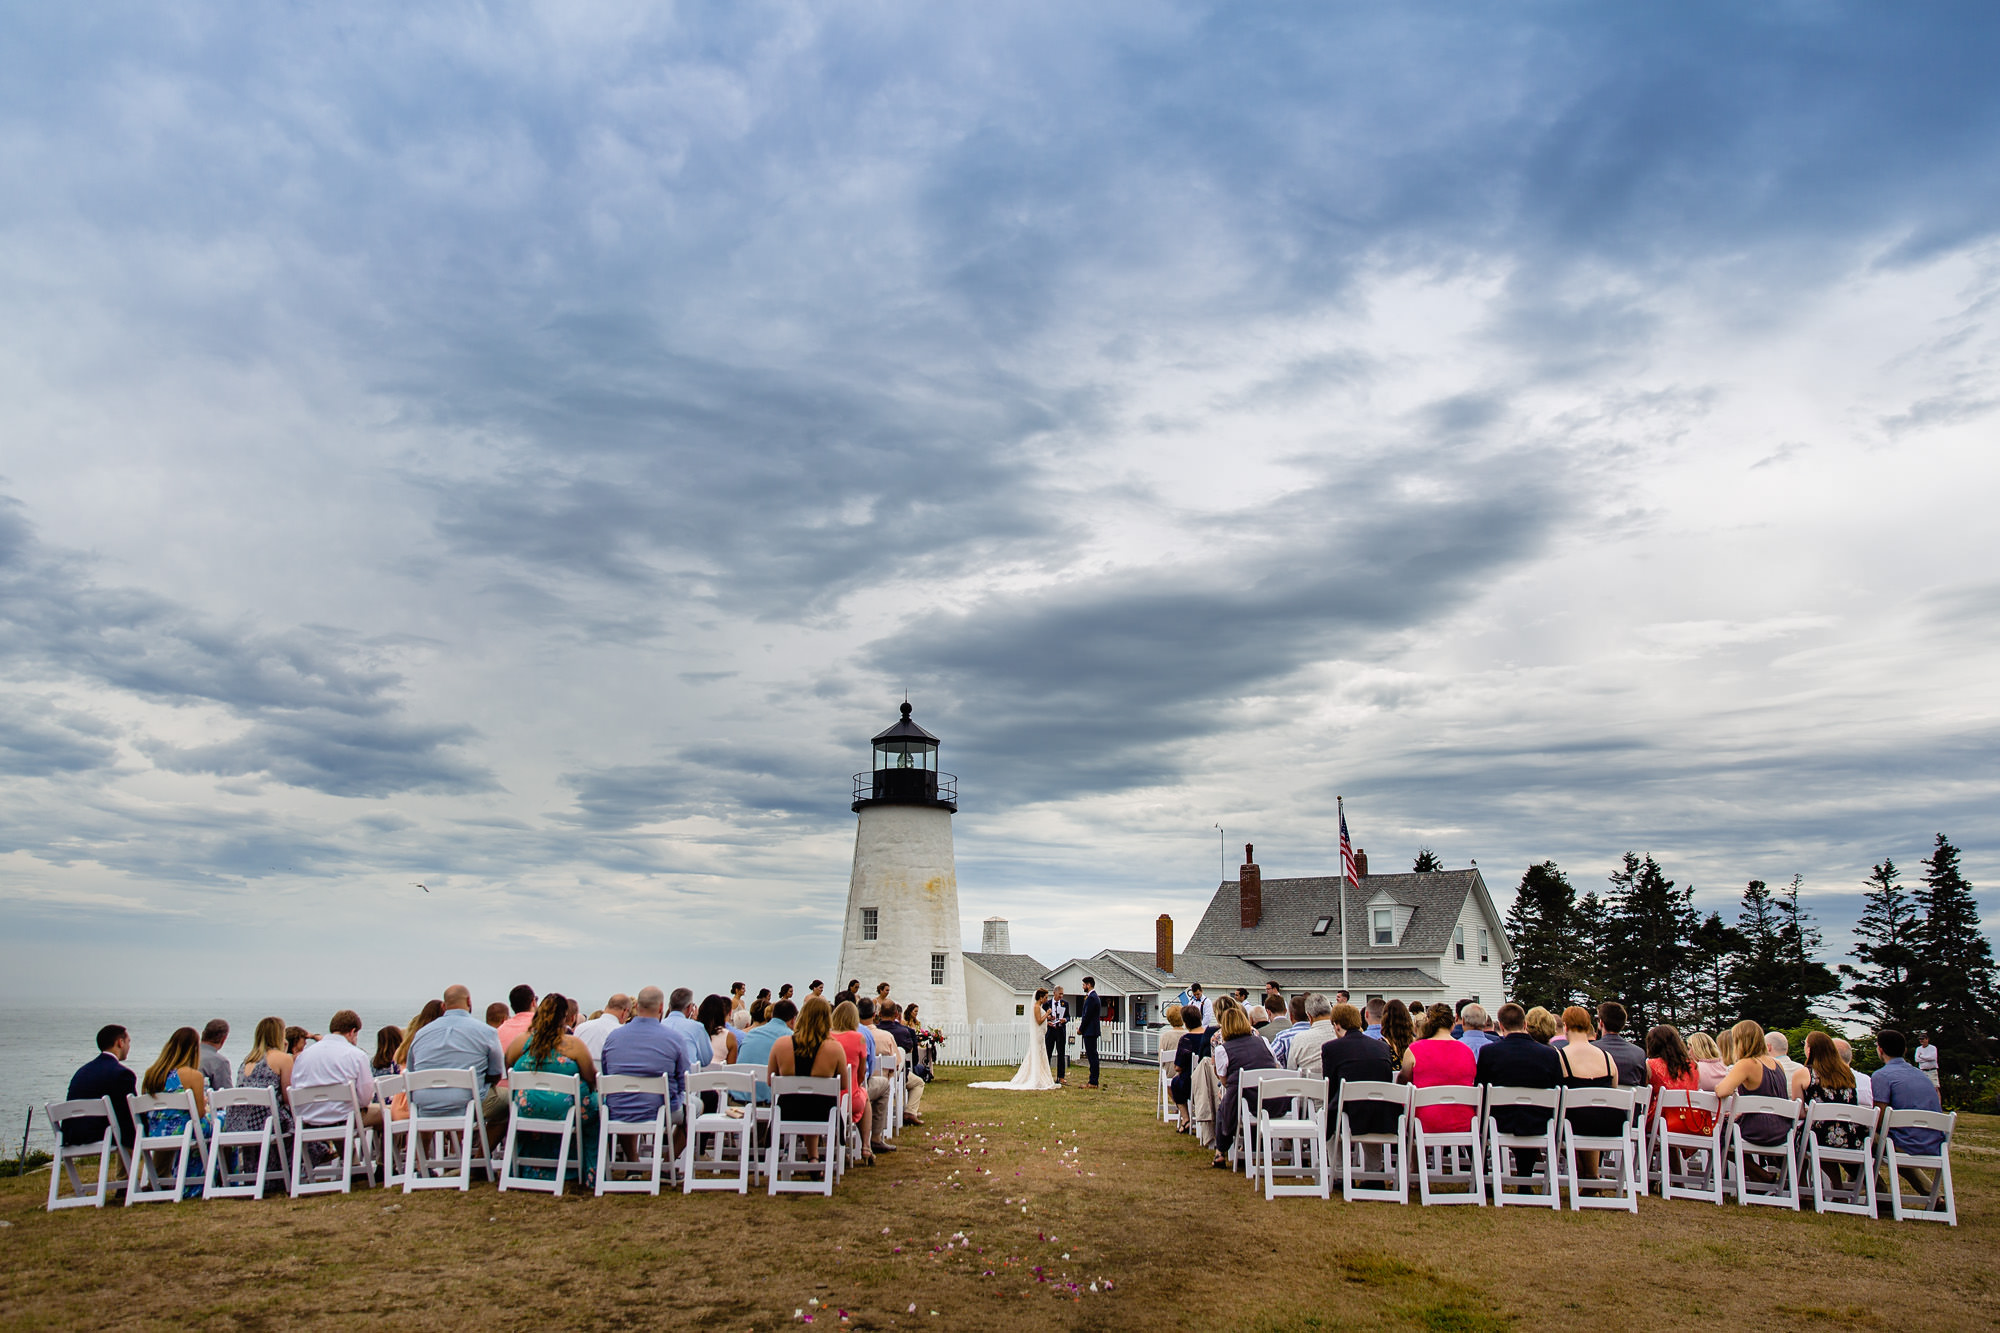 A beautiful and emotional wedding ceremony at Pemaquid Point Lighthouse in Maine